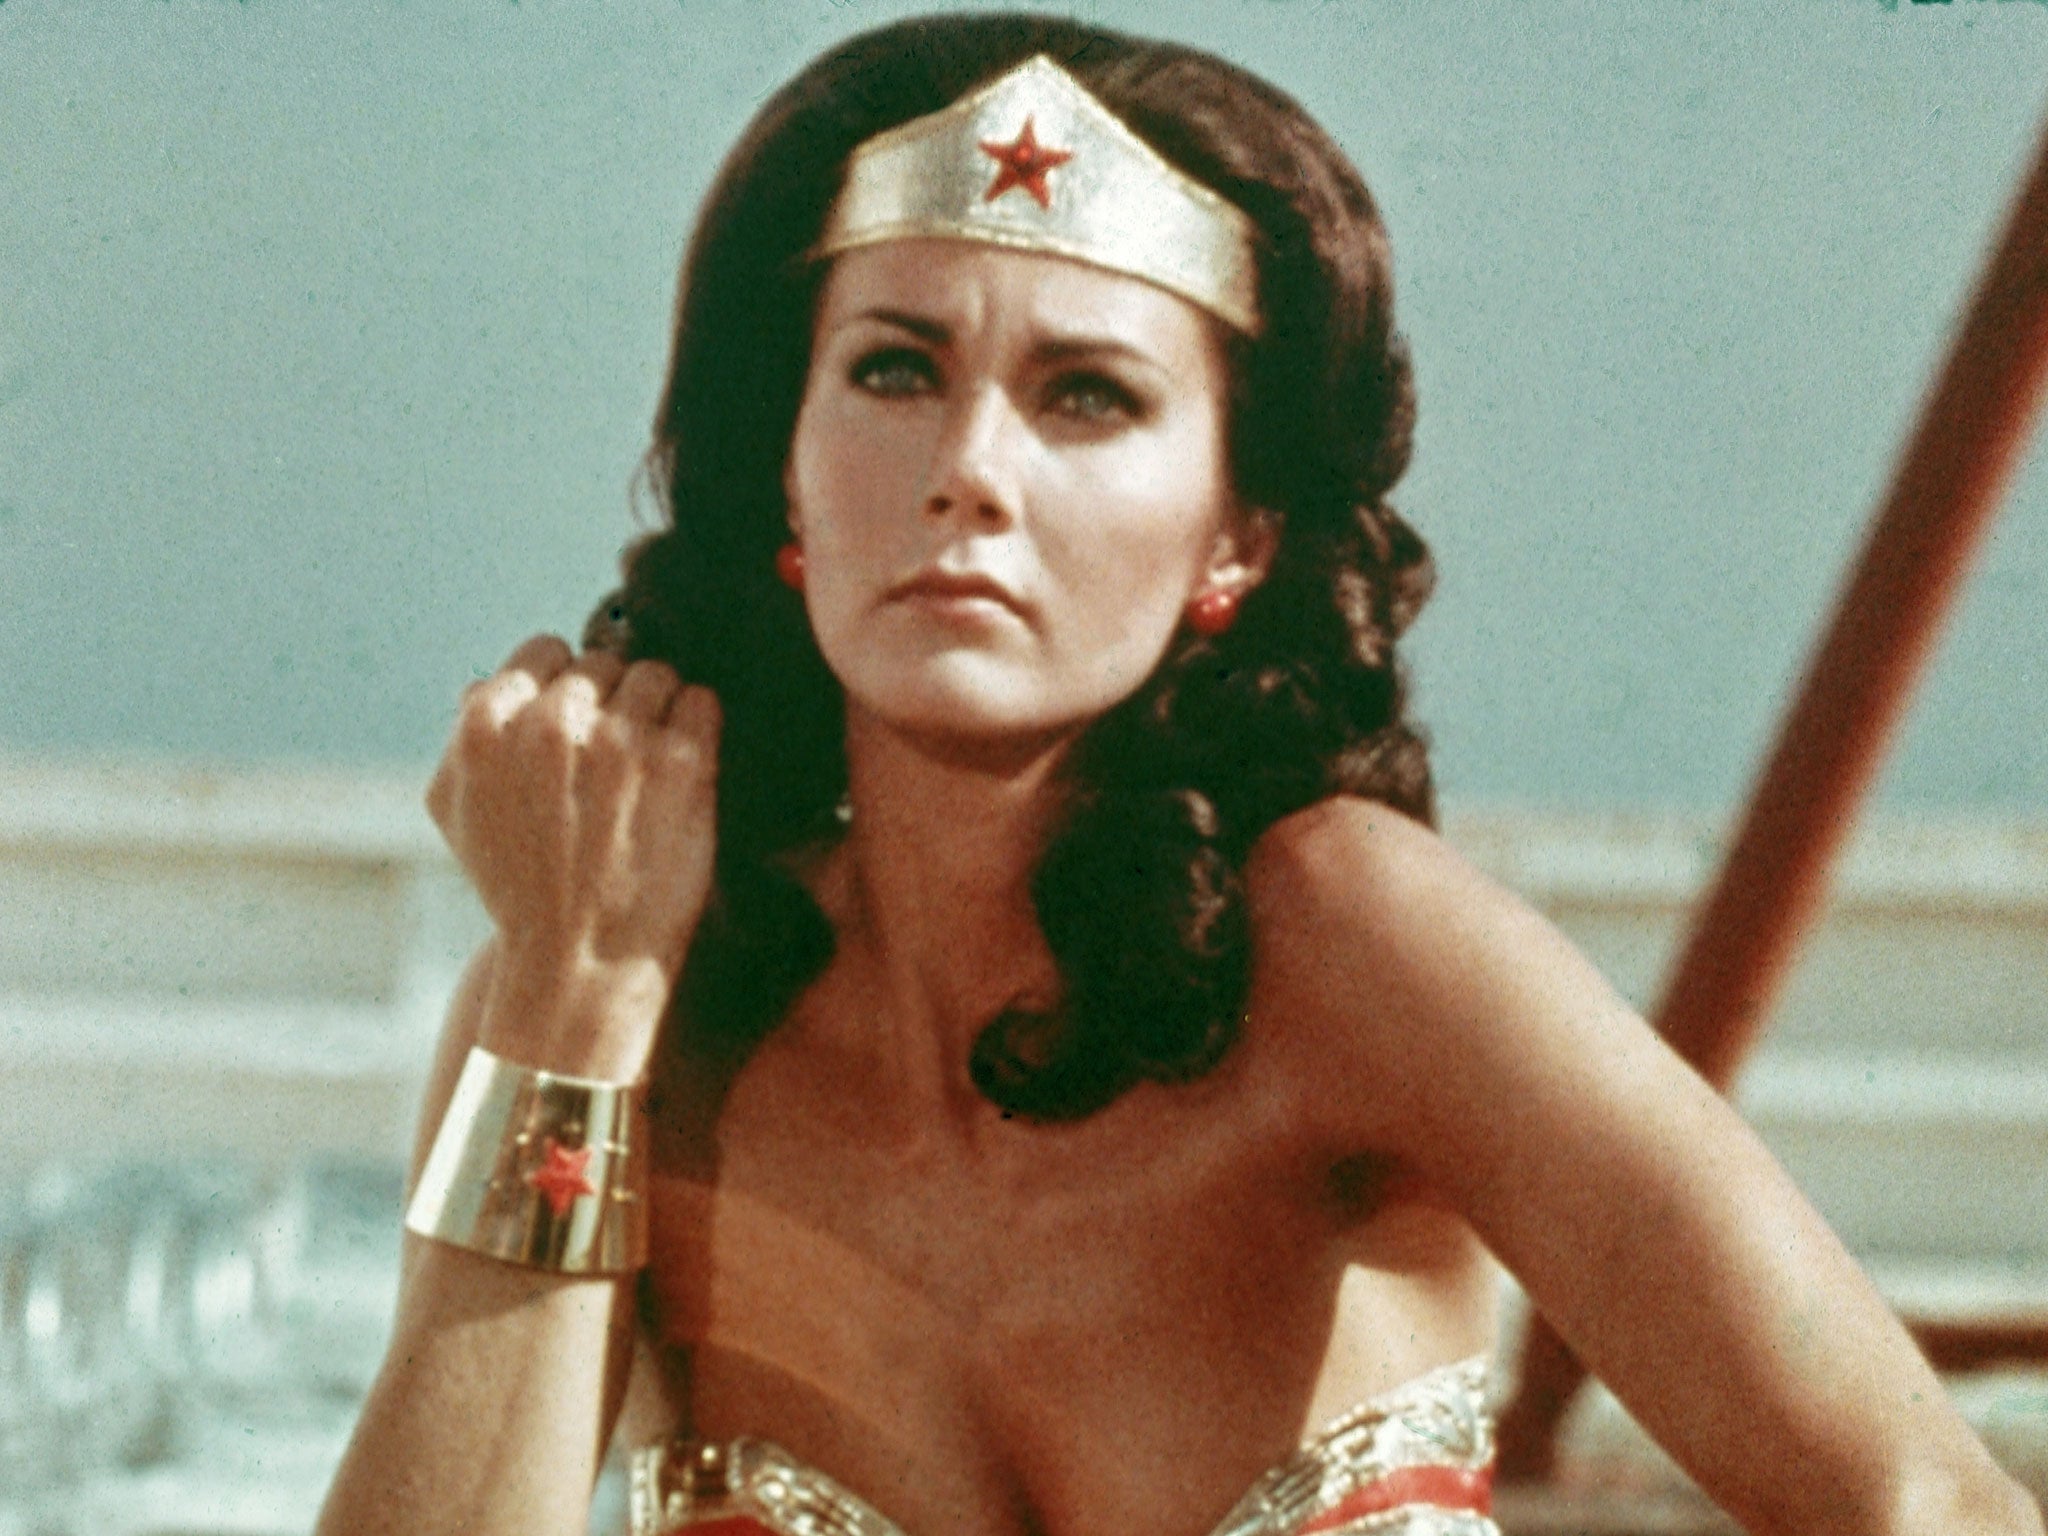 Wonder Woman was played by Lynda Carter in the TV series and will get her own movie in 2017